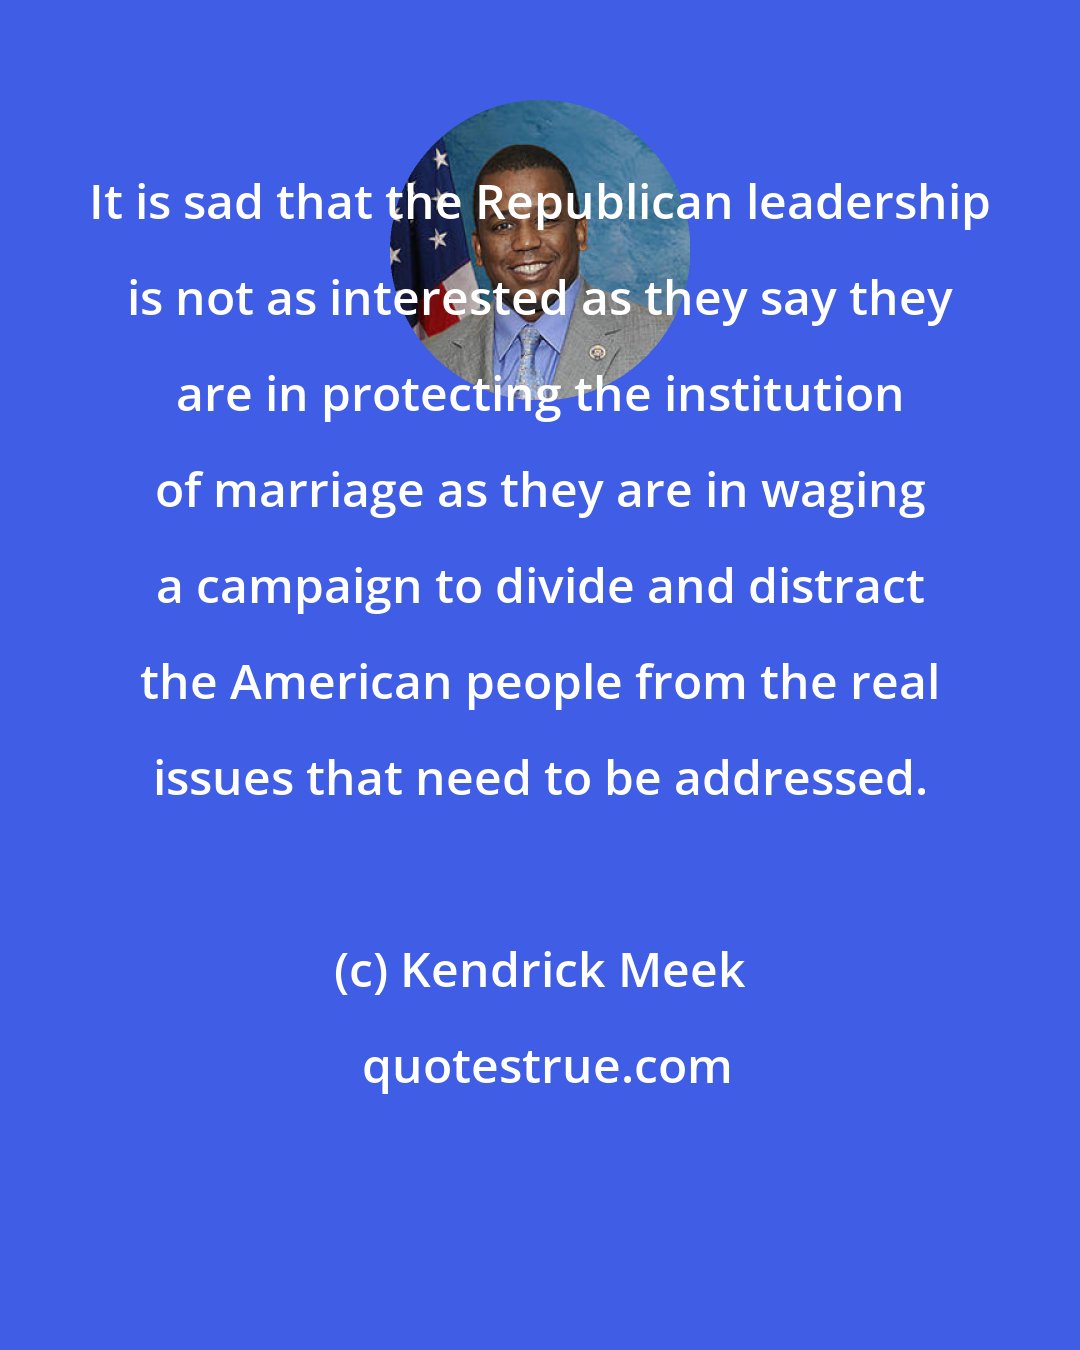 Kendrick Meek: It is sad that the Republican leadership is not as interested as they say they are in protecting the institution of marriage as they are in waging a campaign to divide and distract the American people from the real issues that need to be addressed.